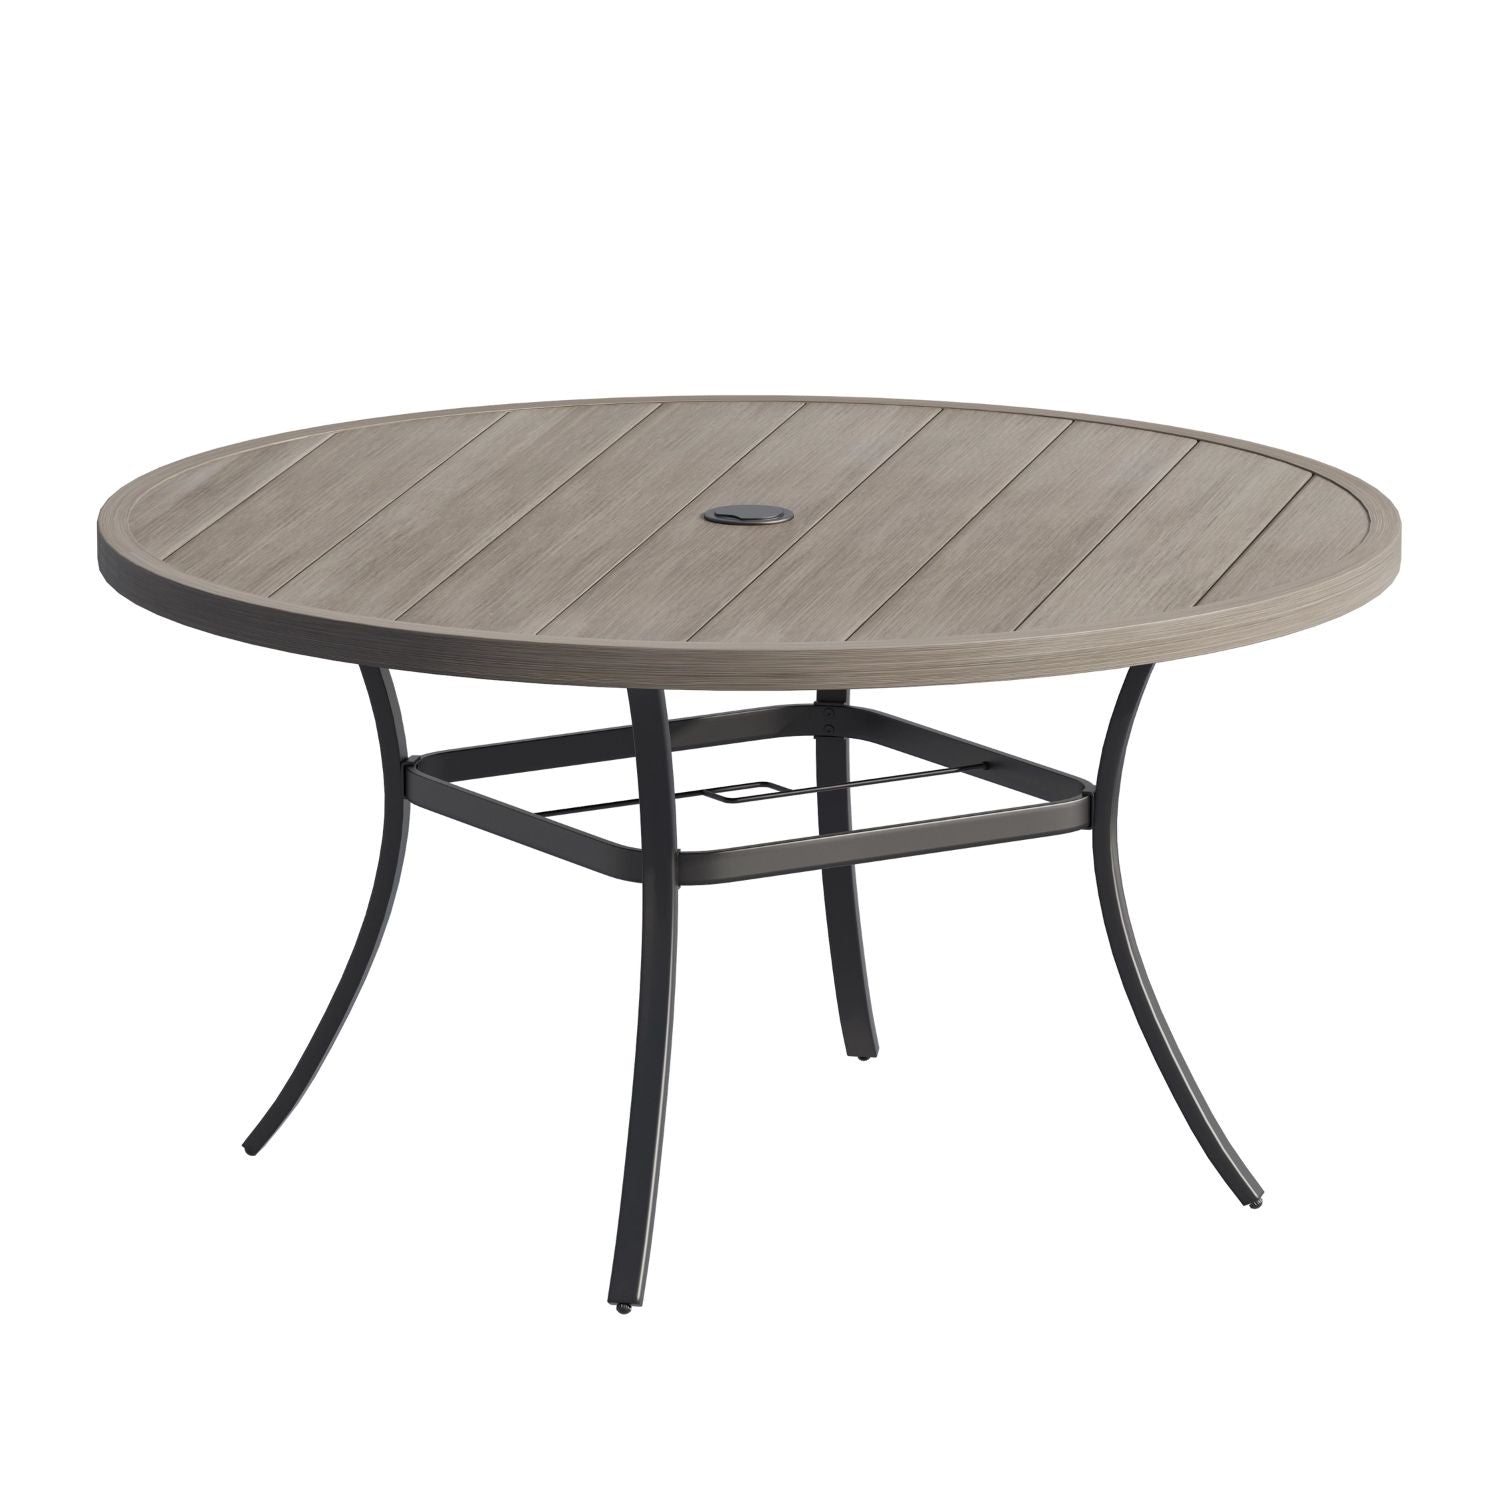 Vicllax 54" Outdoor Round Metal Dining Table with Umbrella Hole for 6, 8